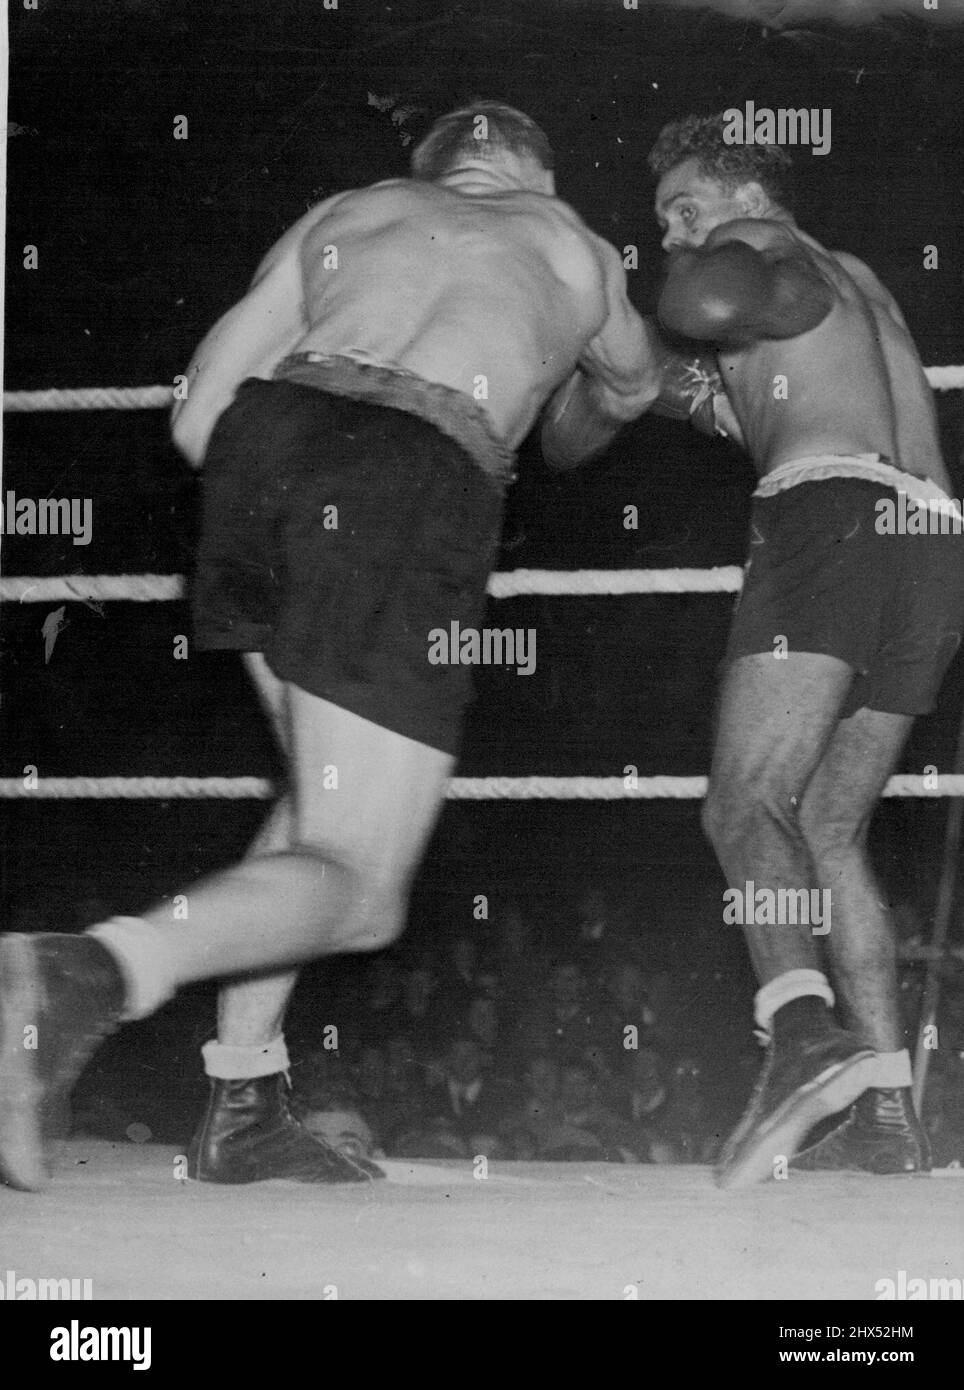 Sands V Mullett Fight At Wellington, N.Z. -- Mullett throws a solid right-hand punch, which Sands avoids by moving slightly to the left. NZ Fight. New Zealand heavyweight champion. Don Mullett, throws a solid right, which fails to connect, in his recent bout with Australian title holder Dave Sands. Sands won on points. April 10, 1948. Stock Photo